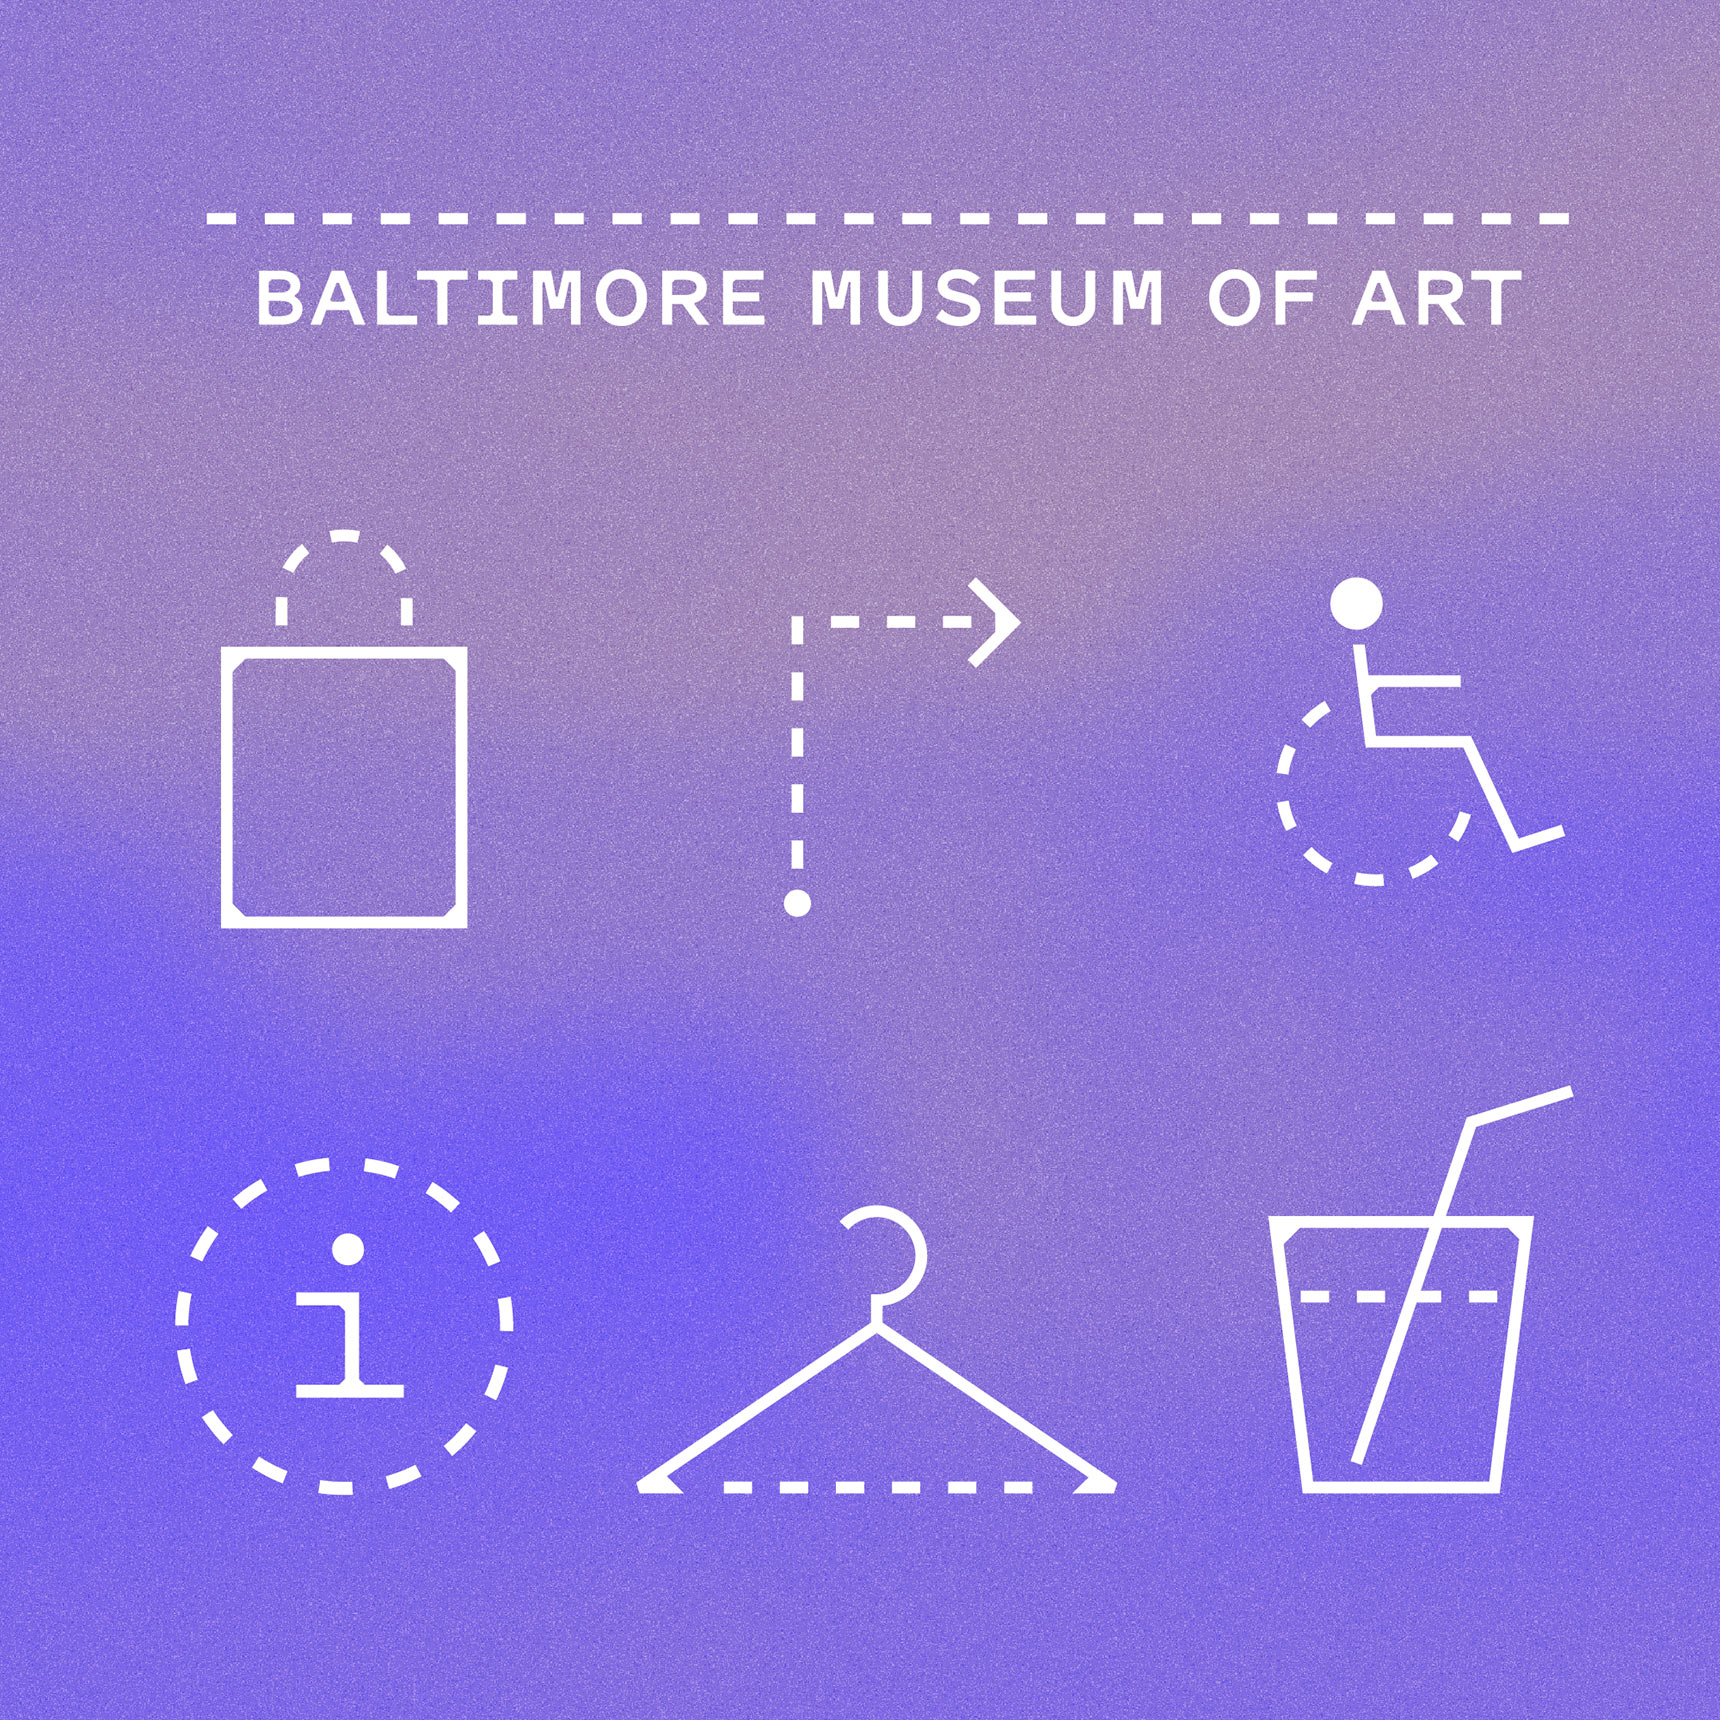 Baltimore Museum of Art brand identity, logo and wayfinding icons